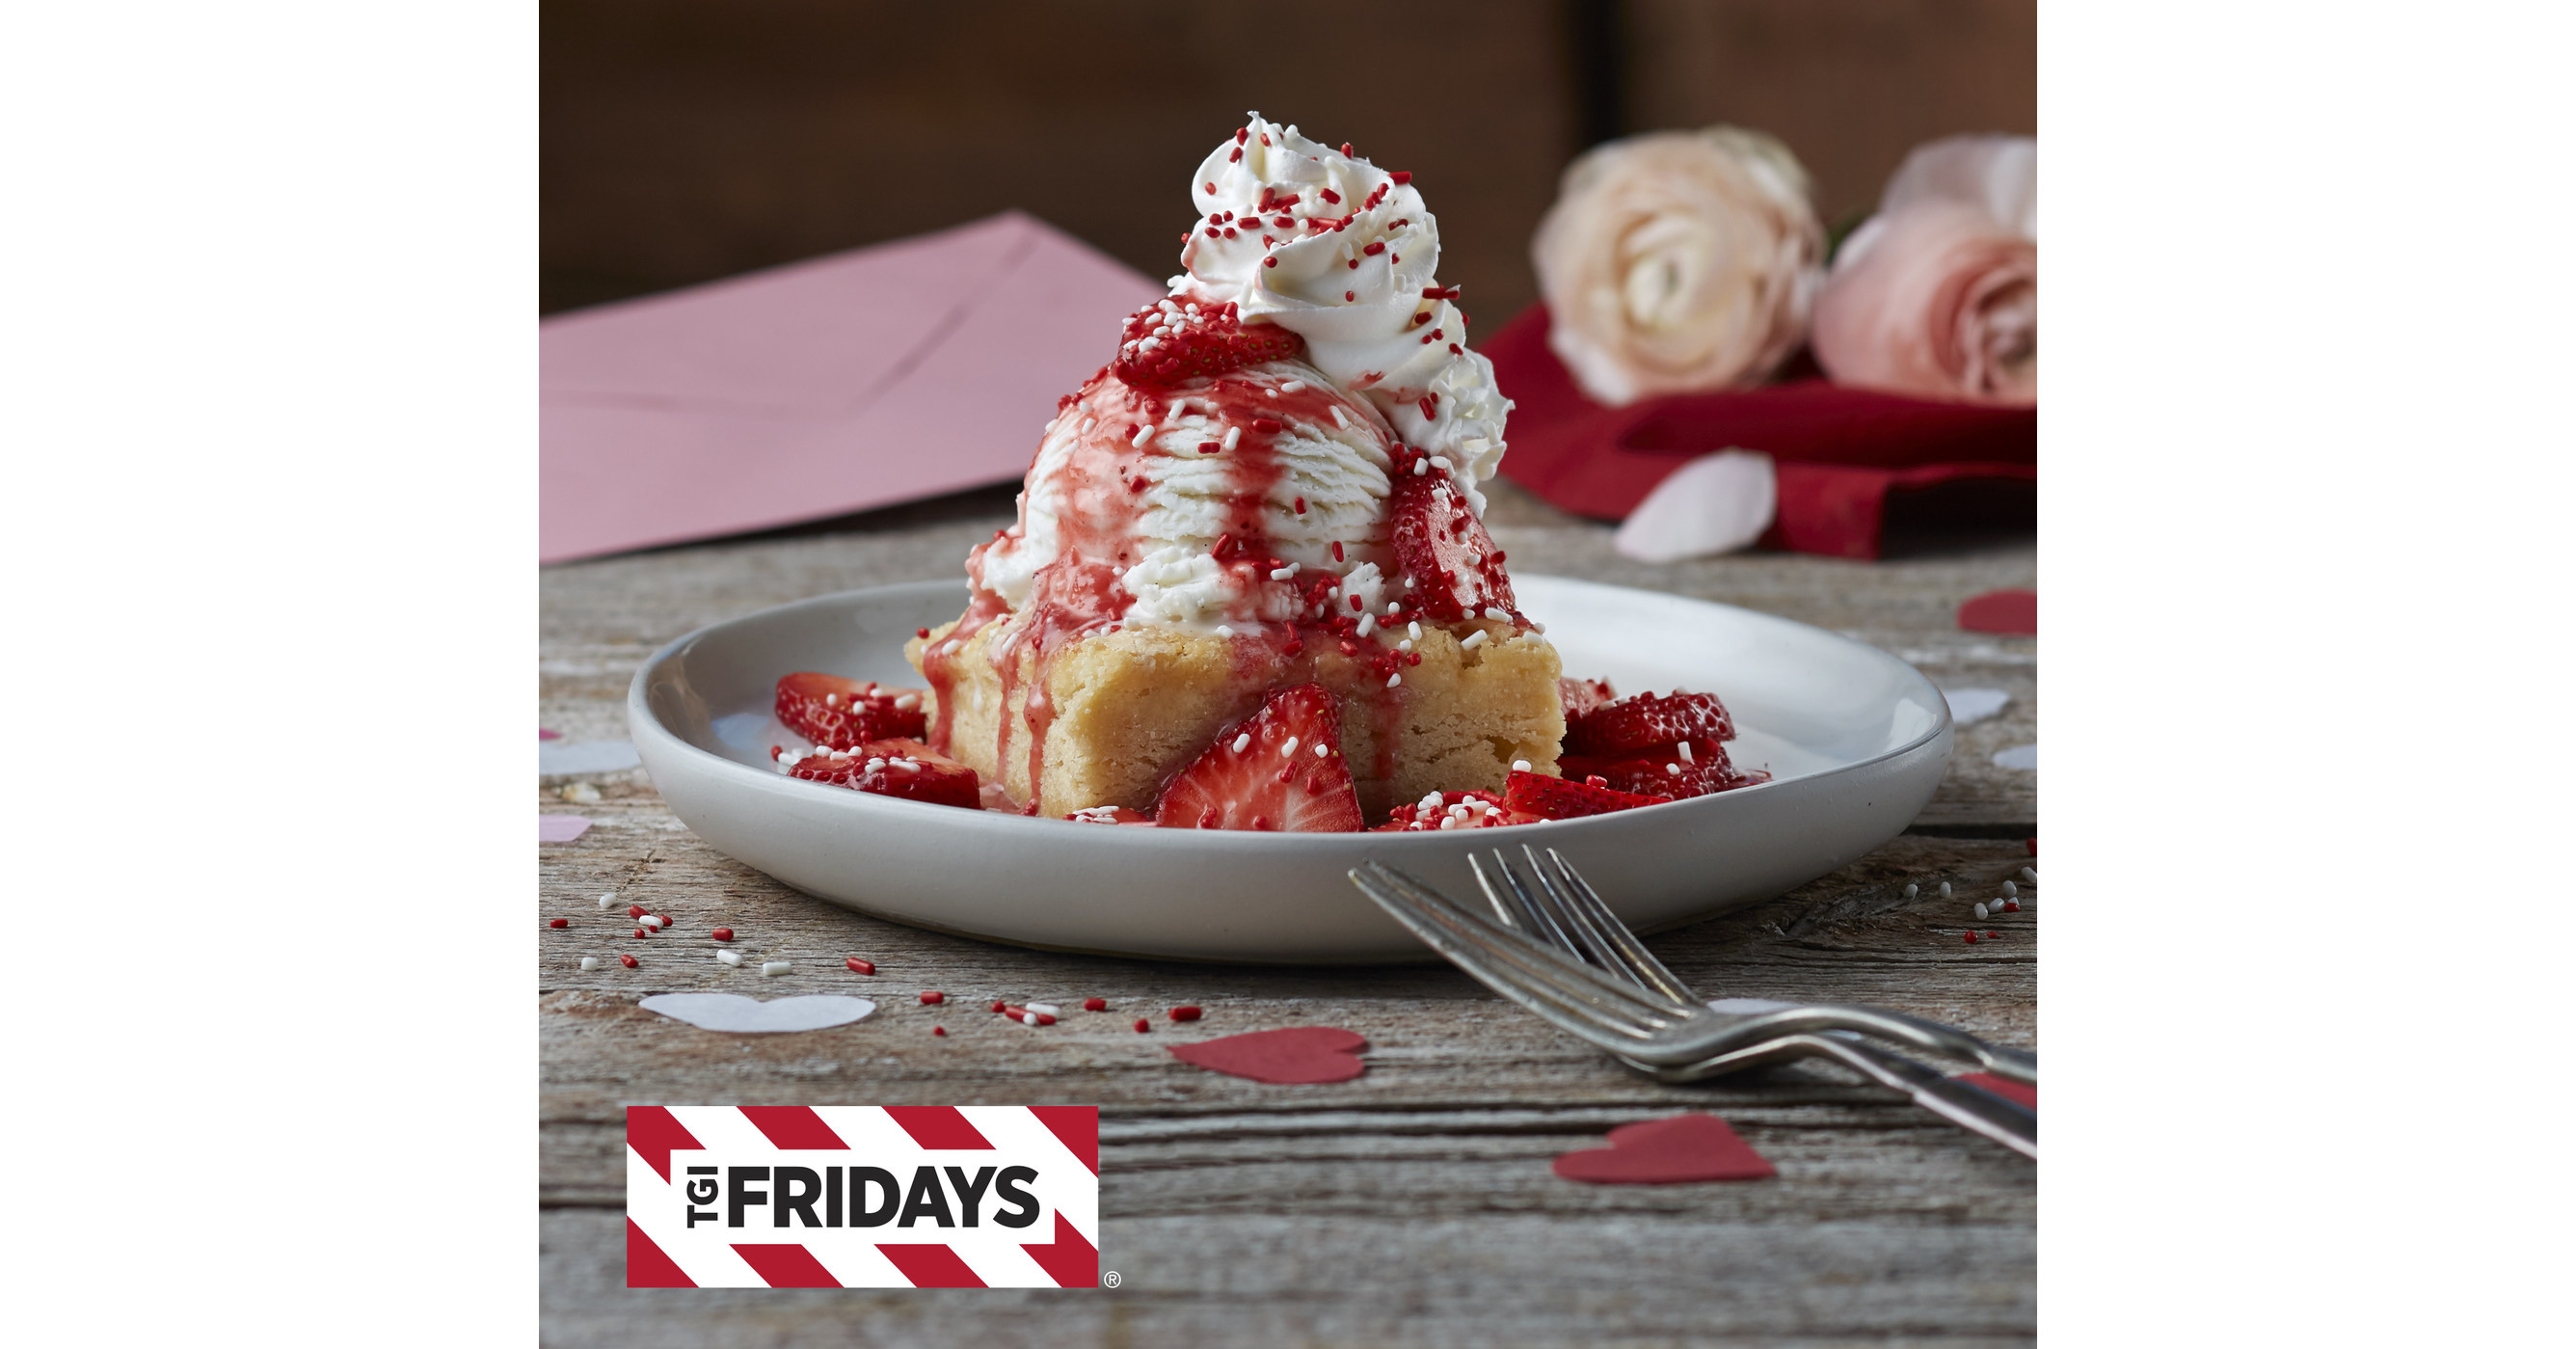 TGI Fridays® Launches Valentine's Weekend Specials and Lent Favorites